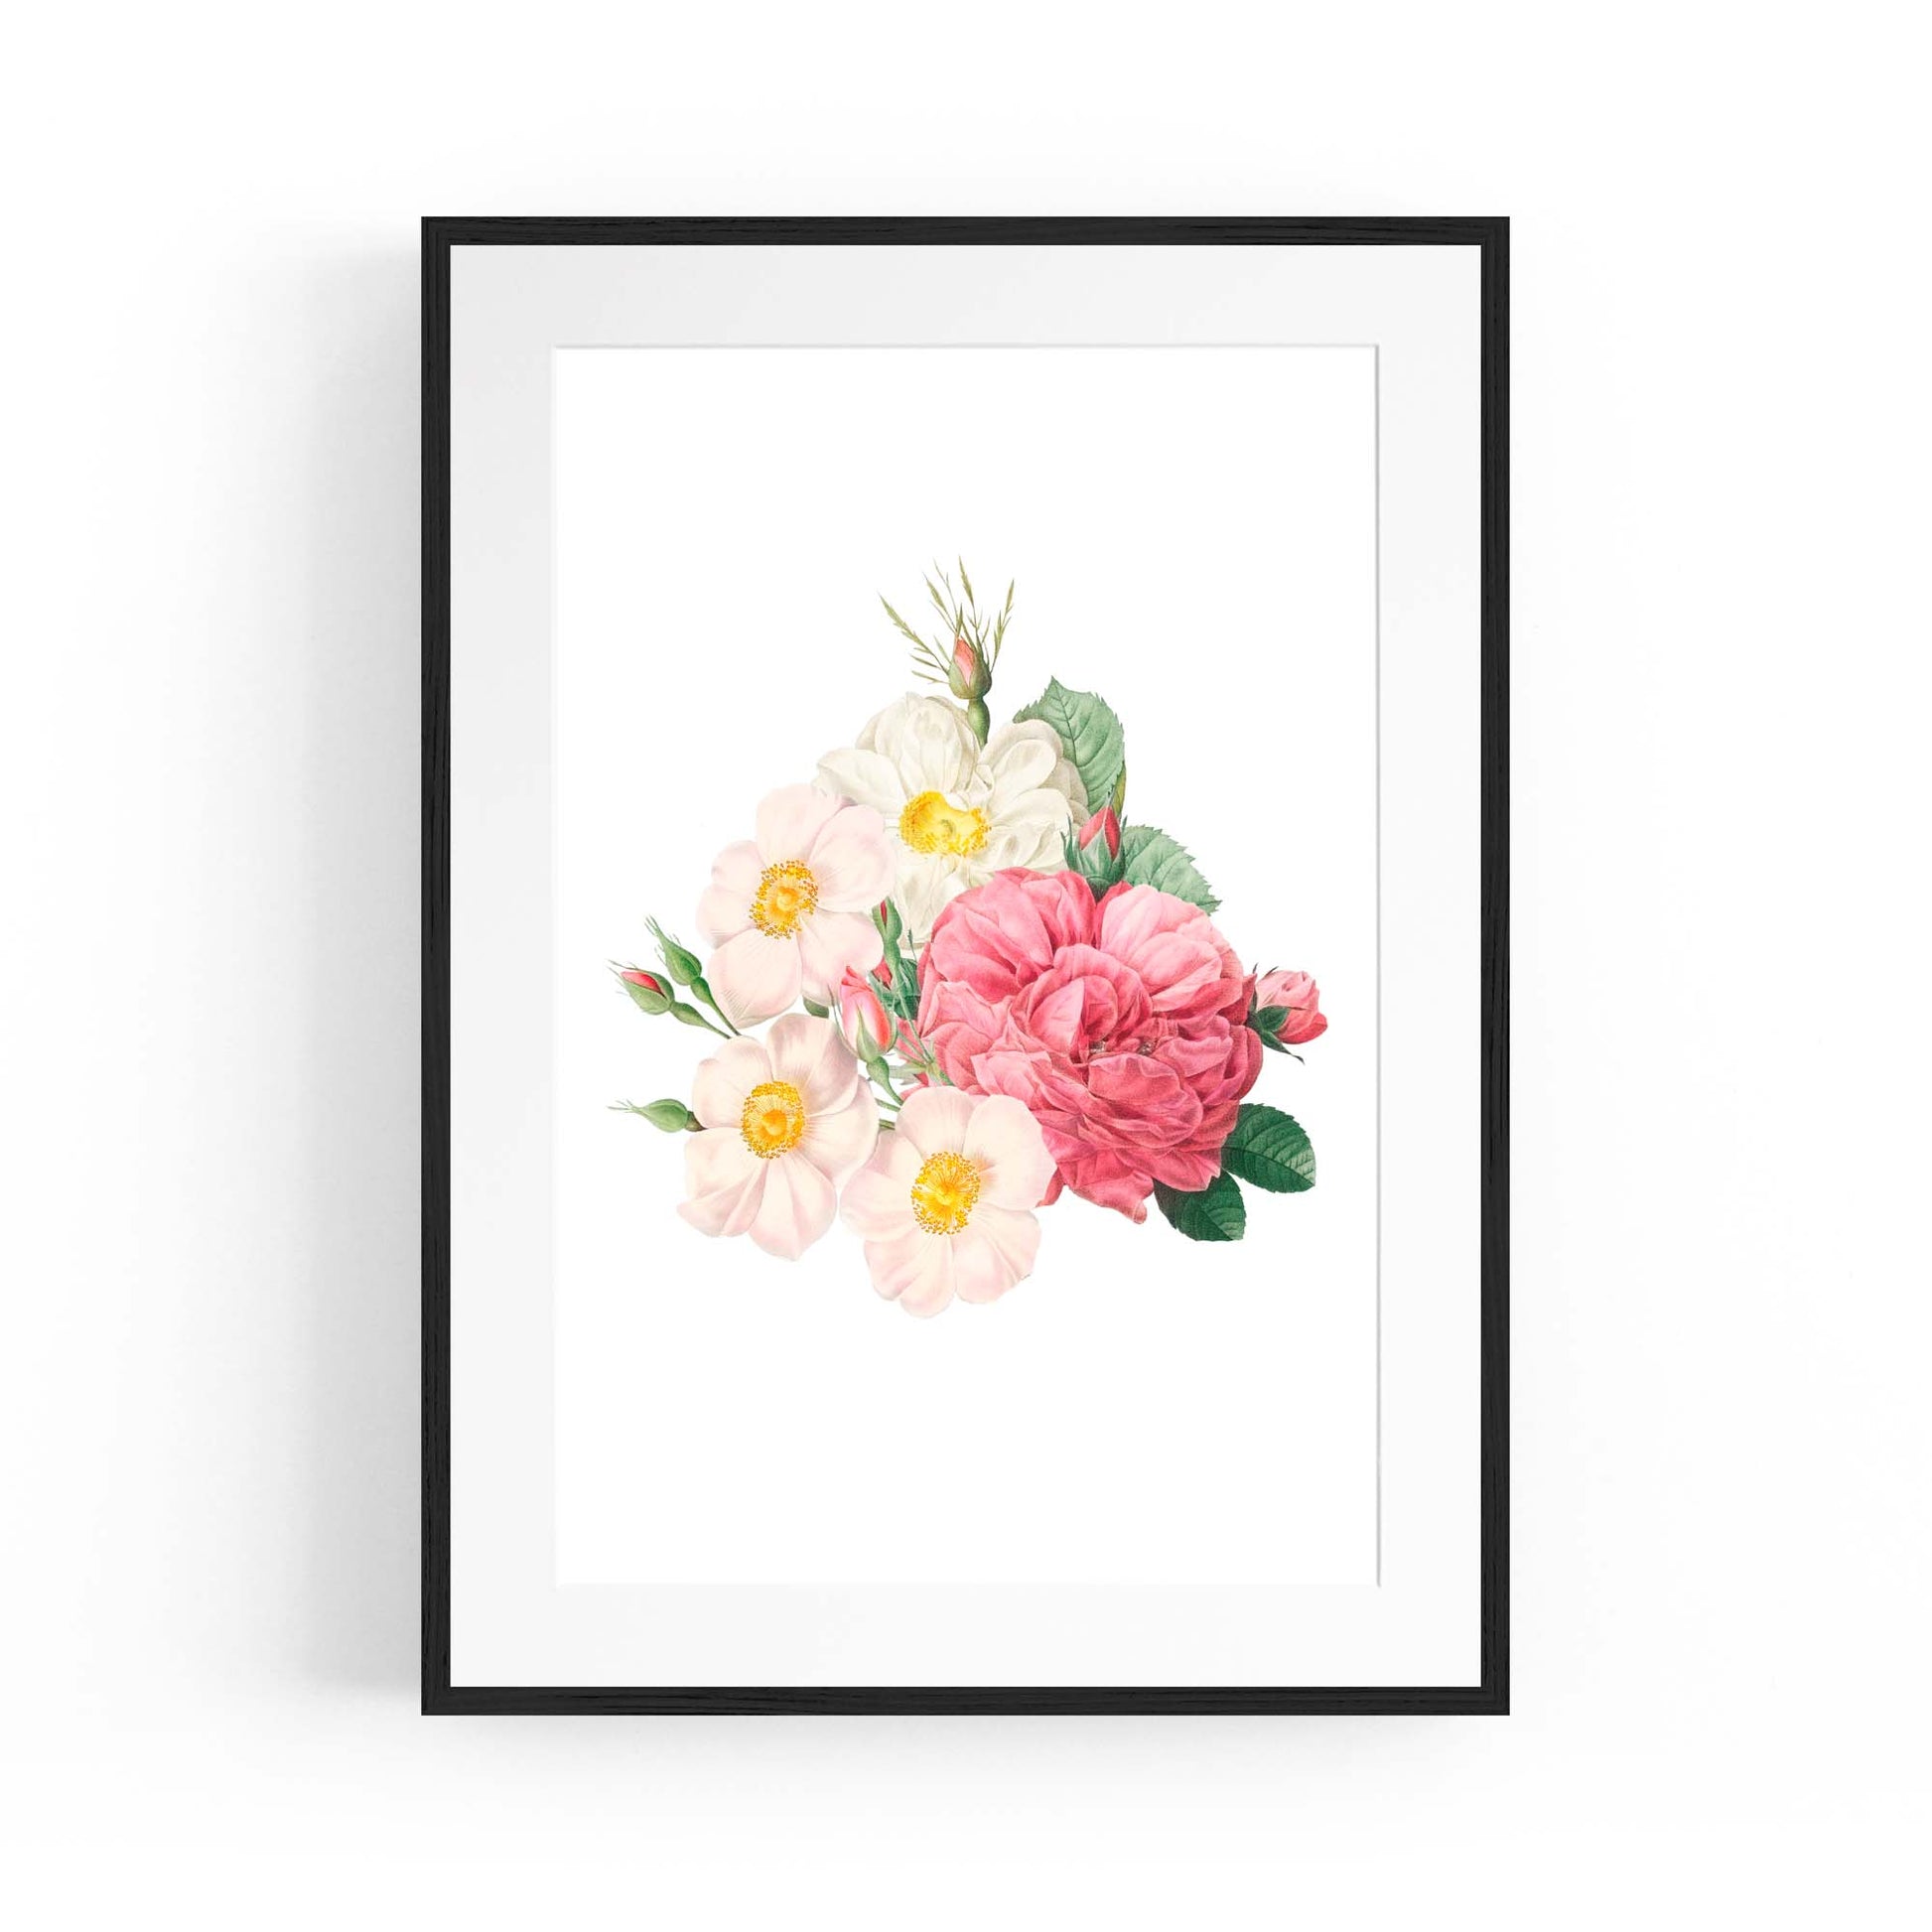 Botanical Flower Painting Floral Kitchen Wall Art #5 - The Affordable Art Company